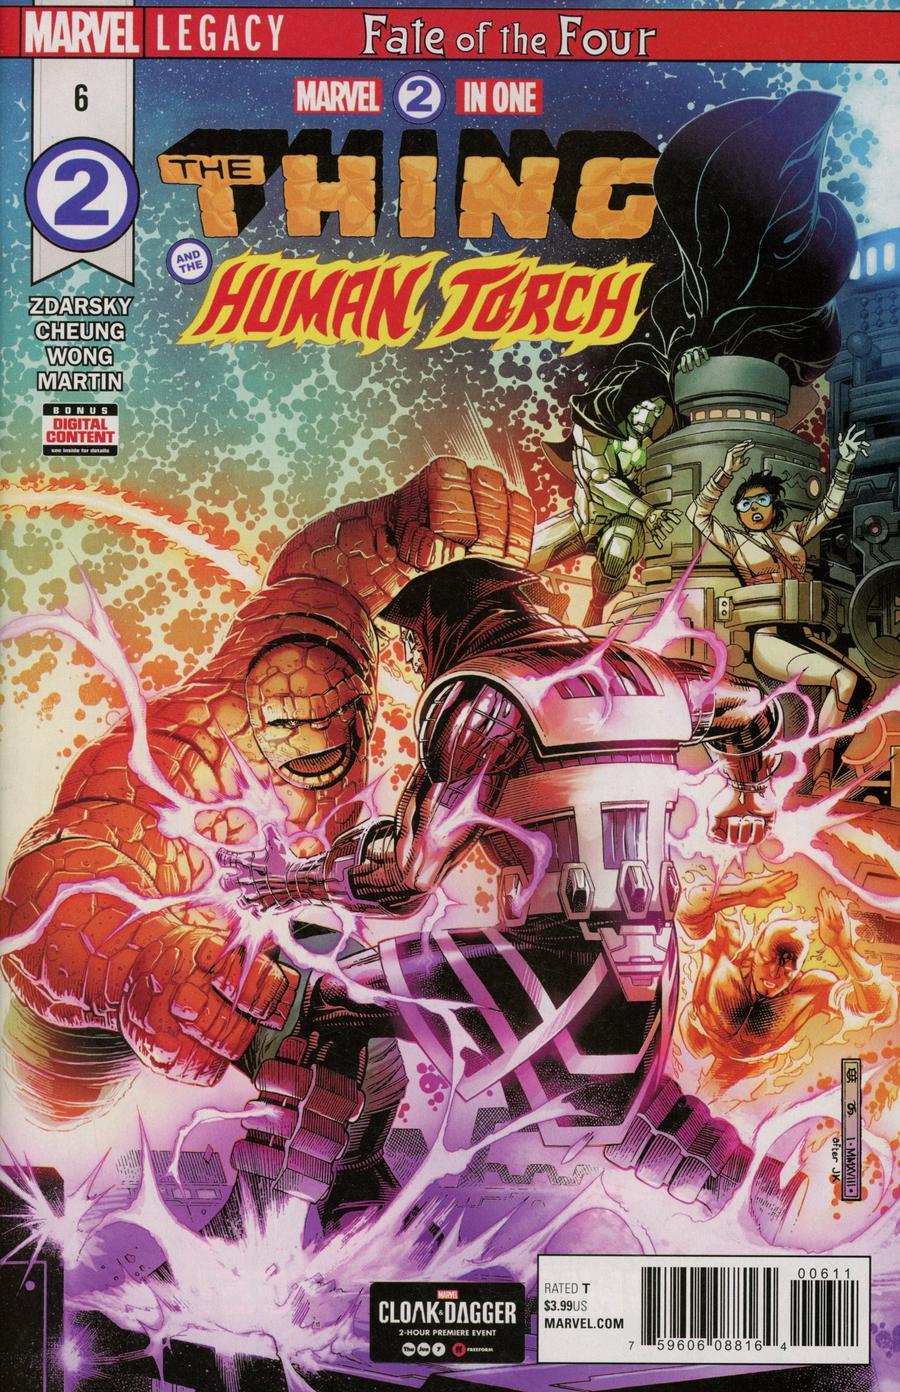 Marvel Two-In-One Vol. 3 #6